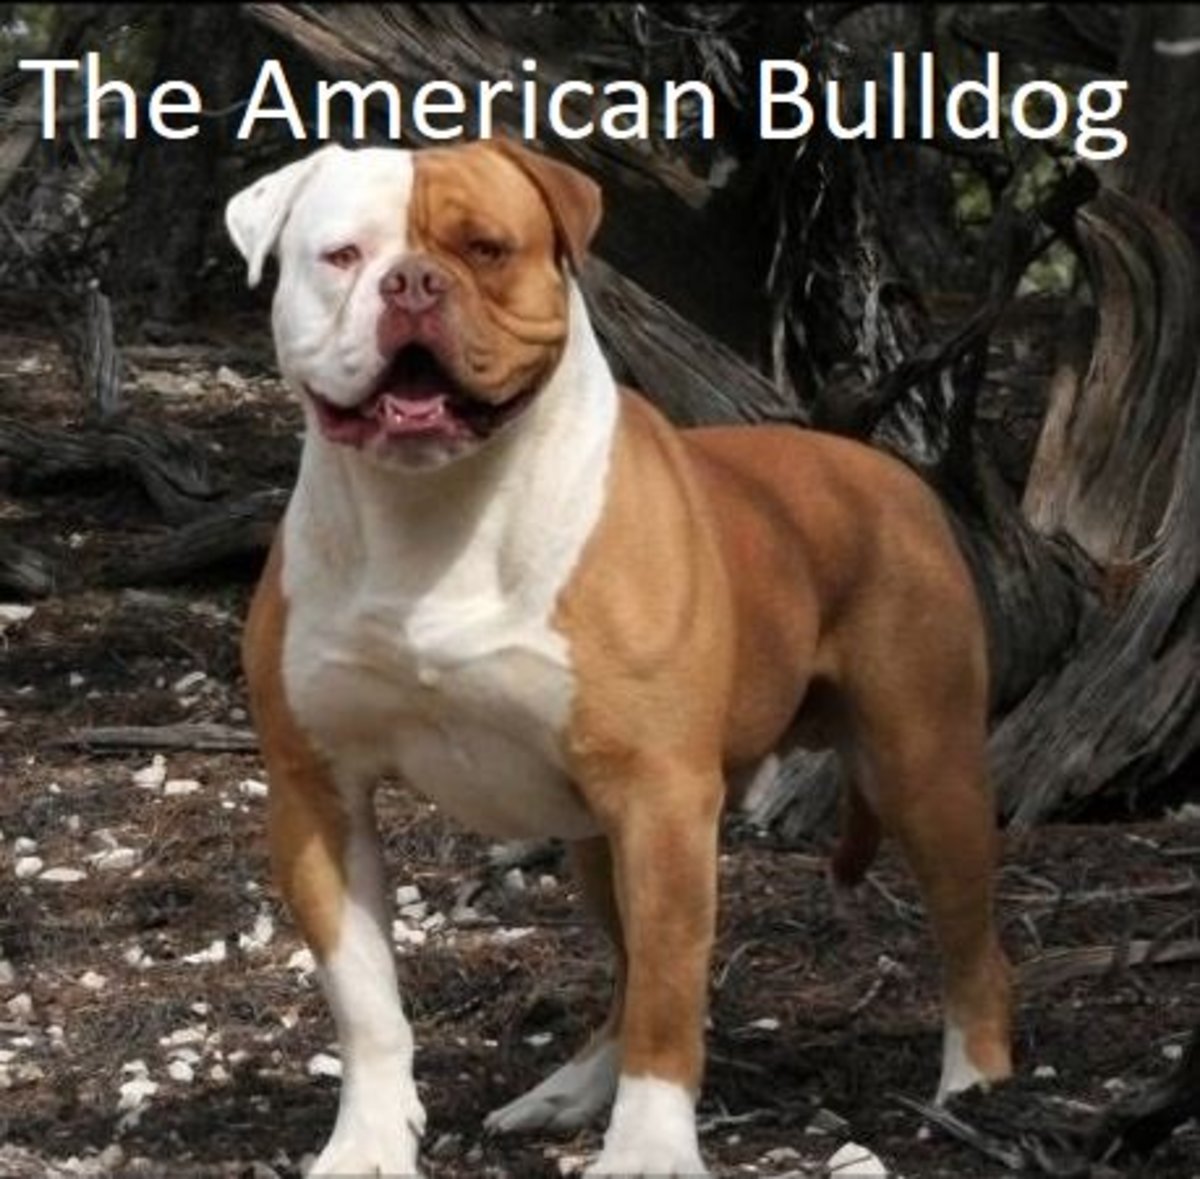 are old english bulldogs considered a aggressive breed